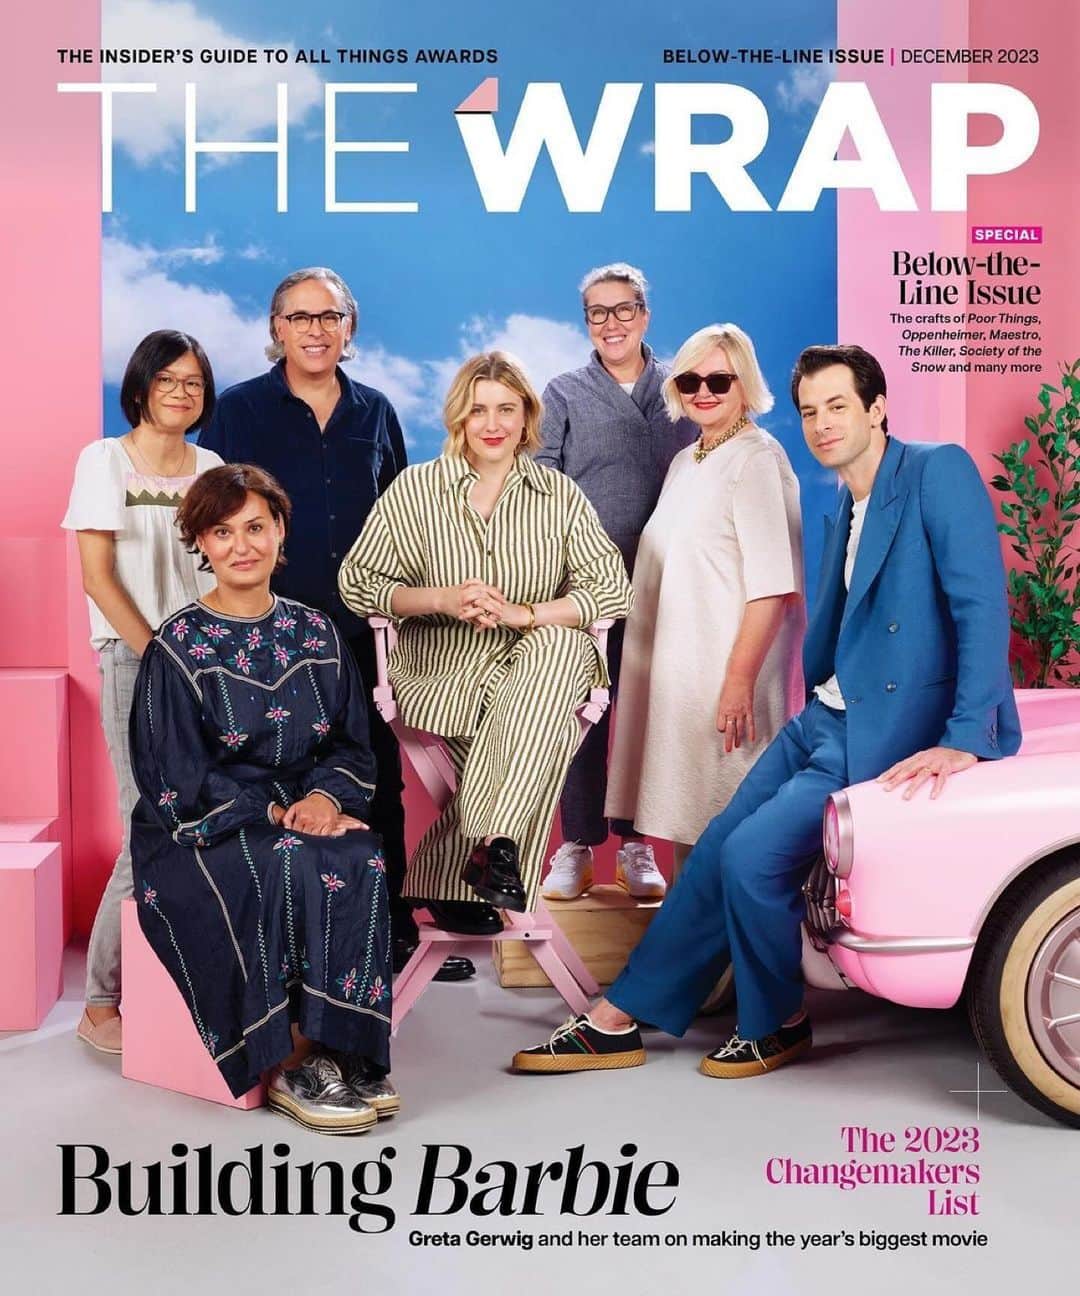 Warner Bros. Picturesのインスタグラム：「Repost from @thewrap: #TheWrapMagazine: Building #Barbie💗, Greta Gerwig and Her Team on Making the Year's Biggest Movie  ✍️: @StevePond31 & @KristenLopez88  📸: @JeffVespa   Photo Editor: @tatianaeleiva  Video Director: @thaddwilliams  Design Director: @shannonbwatkins  Social Director: Carmen Rivera  Creative Team: Chris Smith, @AaronJarboe & Breanne Terrazas   GLAM CREDITS: Makeup:Marylin Lee Spiegel @marylinmakeup  Makeup: Michael Shepherd @makeupartistmichael Hair: Joannel Clemente  Hair & Makeup:  Andrew Zepeda @andrewzepeda  Mark Ronson Groomer: Candice Birns @aframe agency @hairbycandicebirns   Greta Gerwig Stylist: Kate Young @kateyoung Hair: John D @hairbyjohnd  Makeup: Sabrina Bedrani for @diorbeauty @sabrinabmakeup」